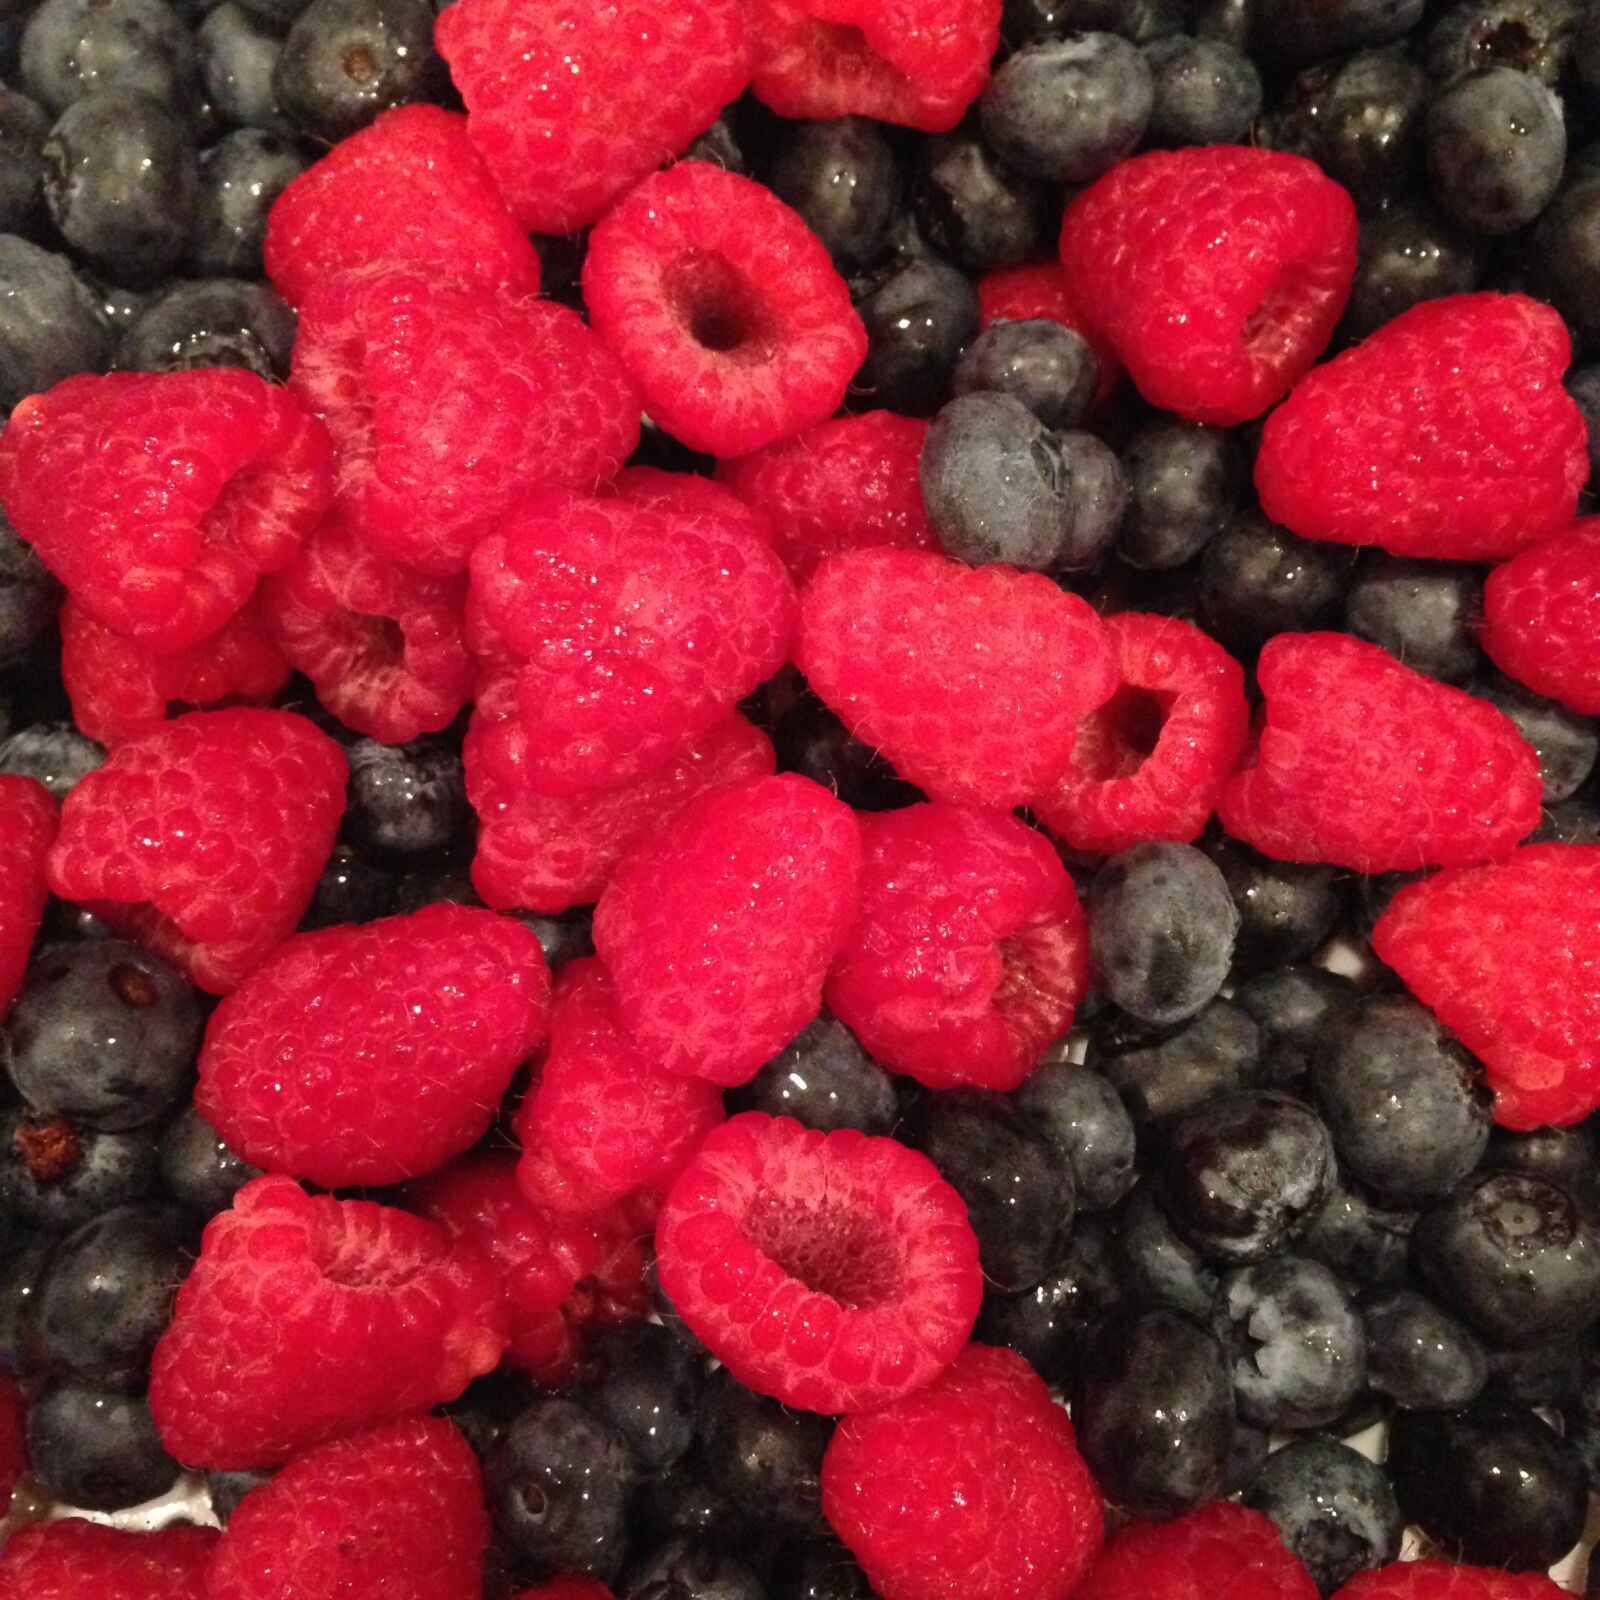 Apple iPhone 5c sample photo. Berries, blueberries, blueberry, food photography